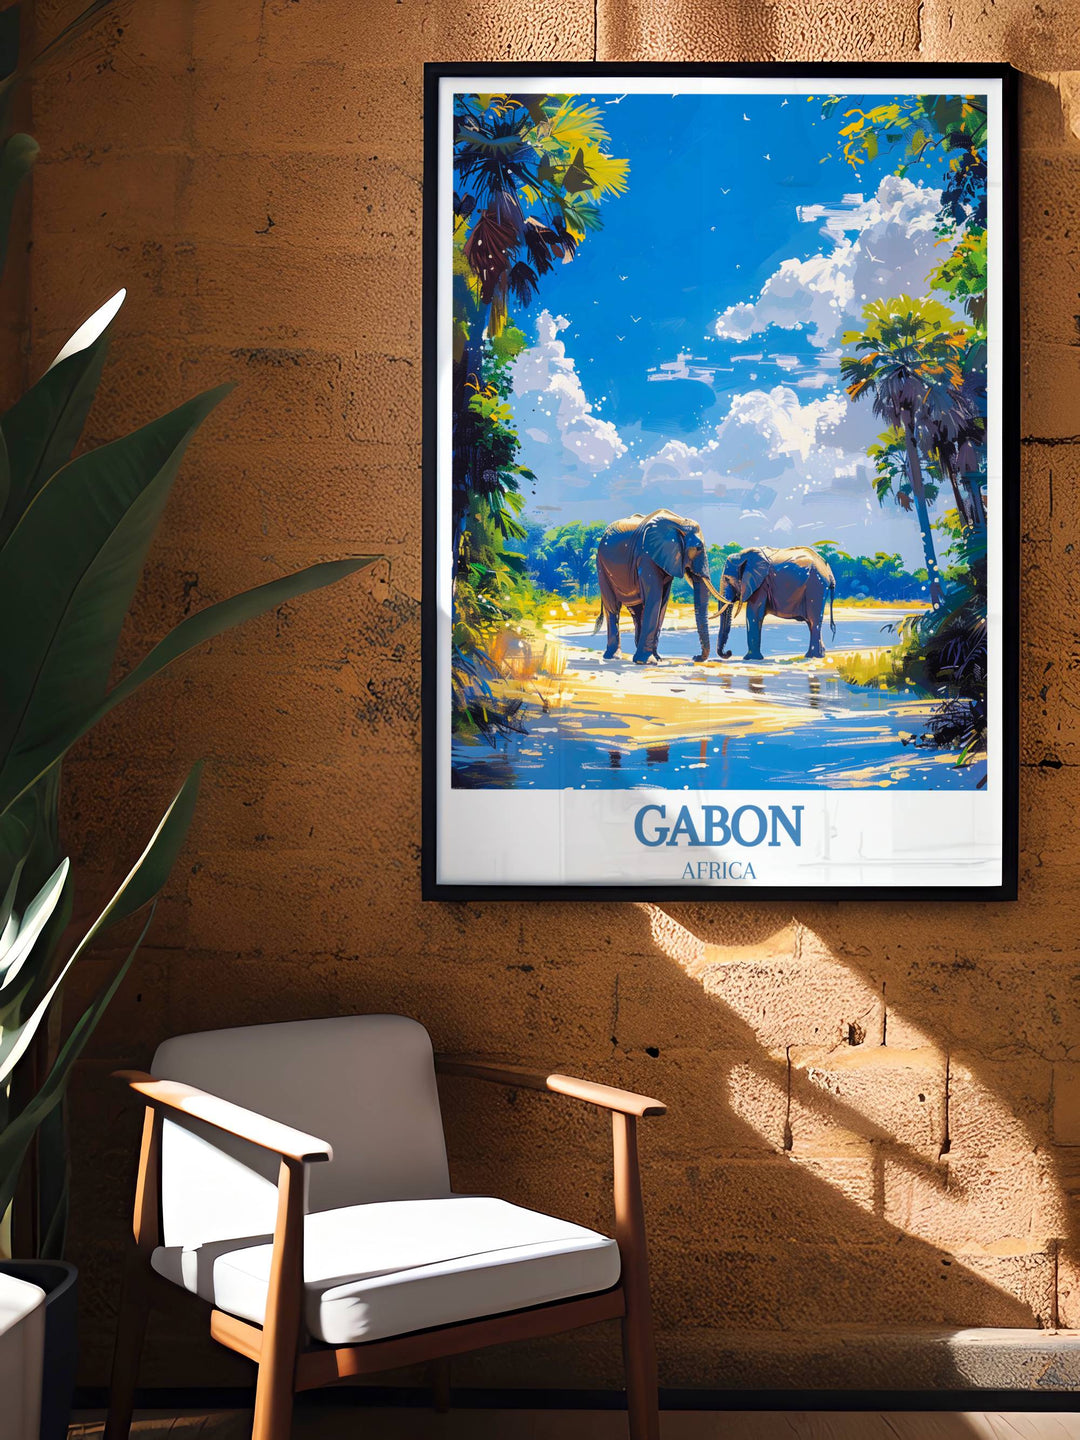 Mesmerizing Gabon Art captures the spirit of adventure in Loango National Park and the tranquility of Lopé National Park Print.